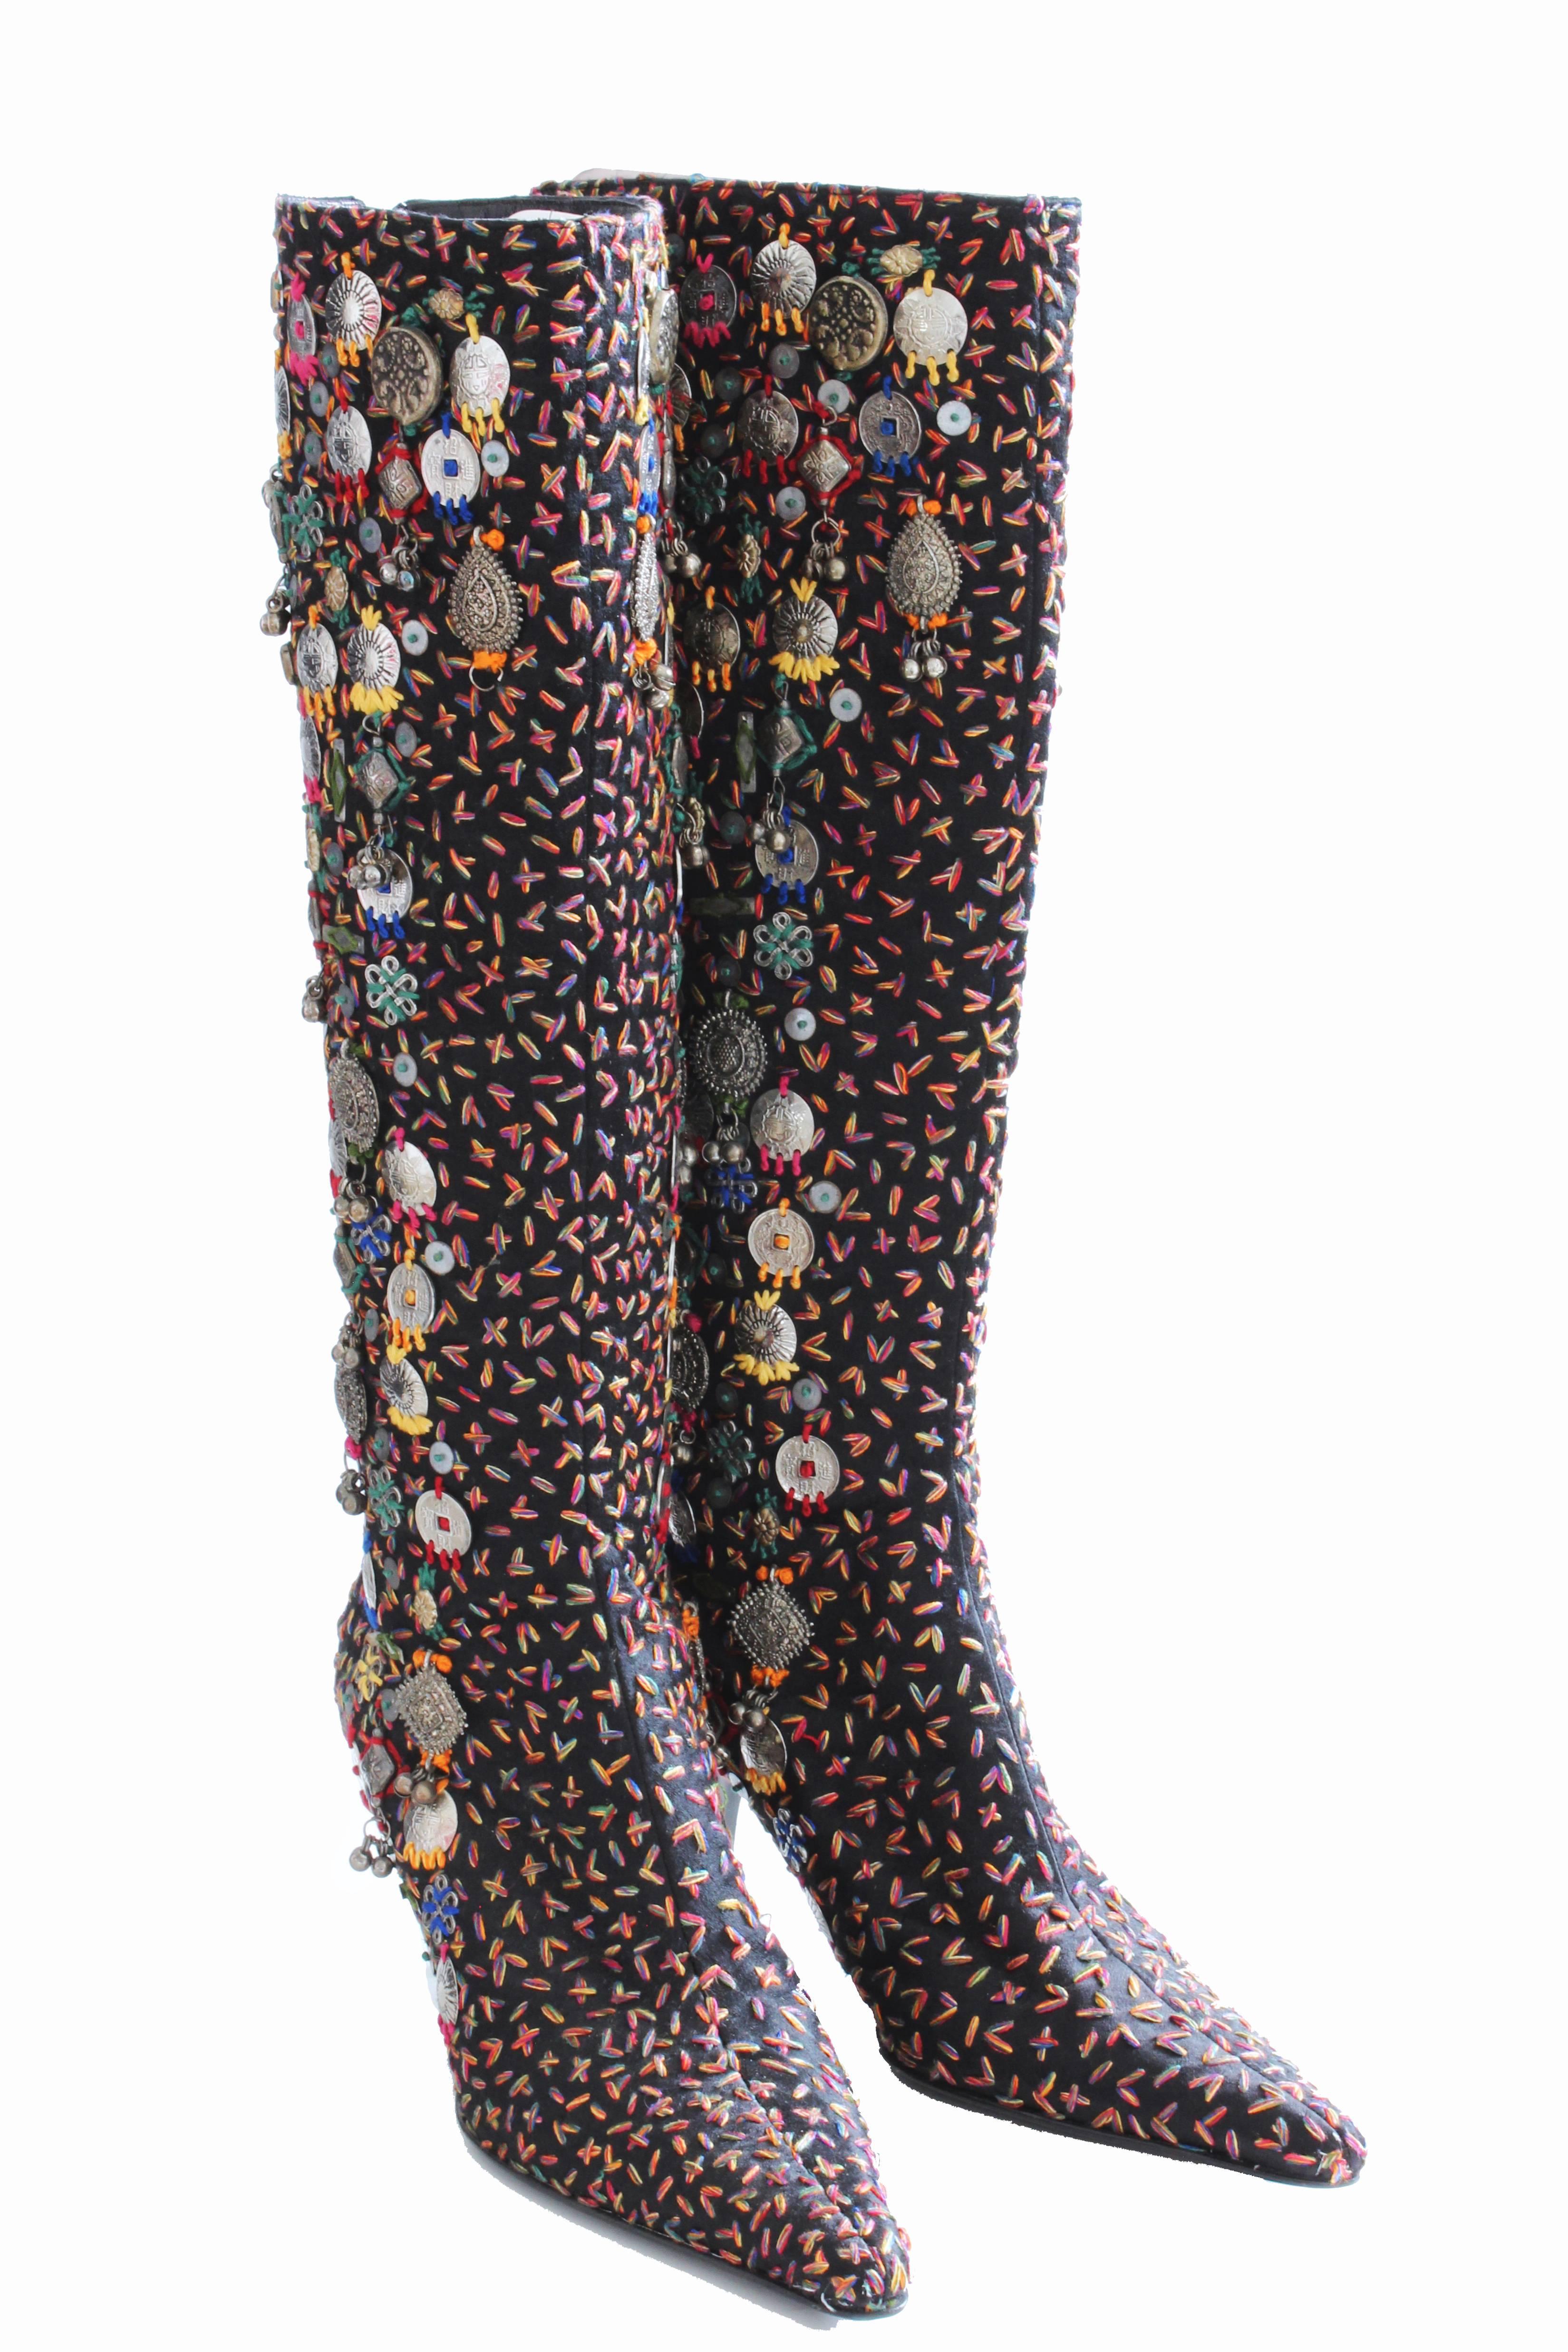 Oscar de la Renta Embellished Knee High Boots Black with Embroidery Italy In Good Condition In Port Saint Lucie, FL